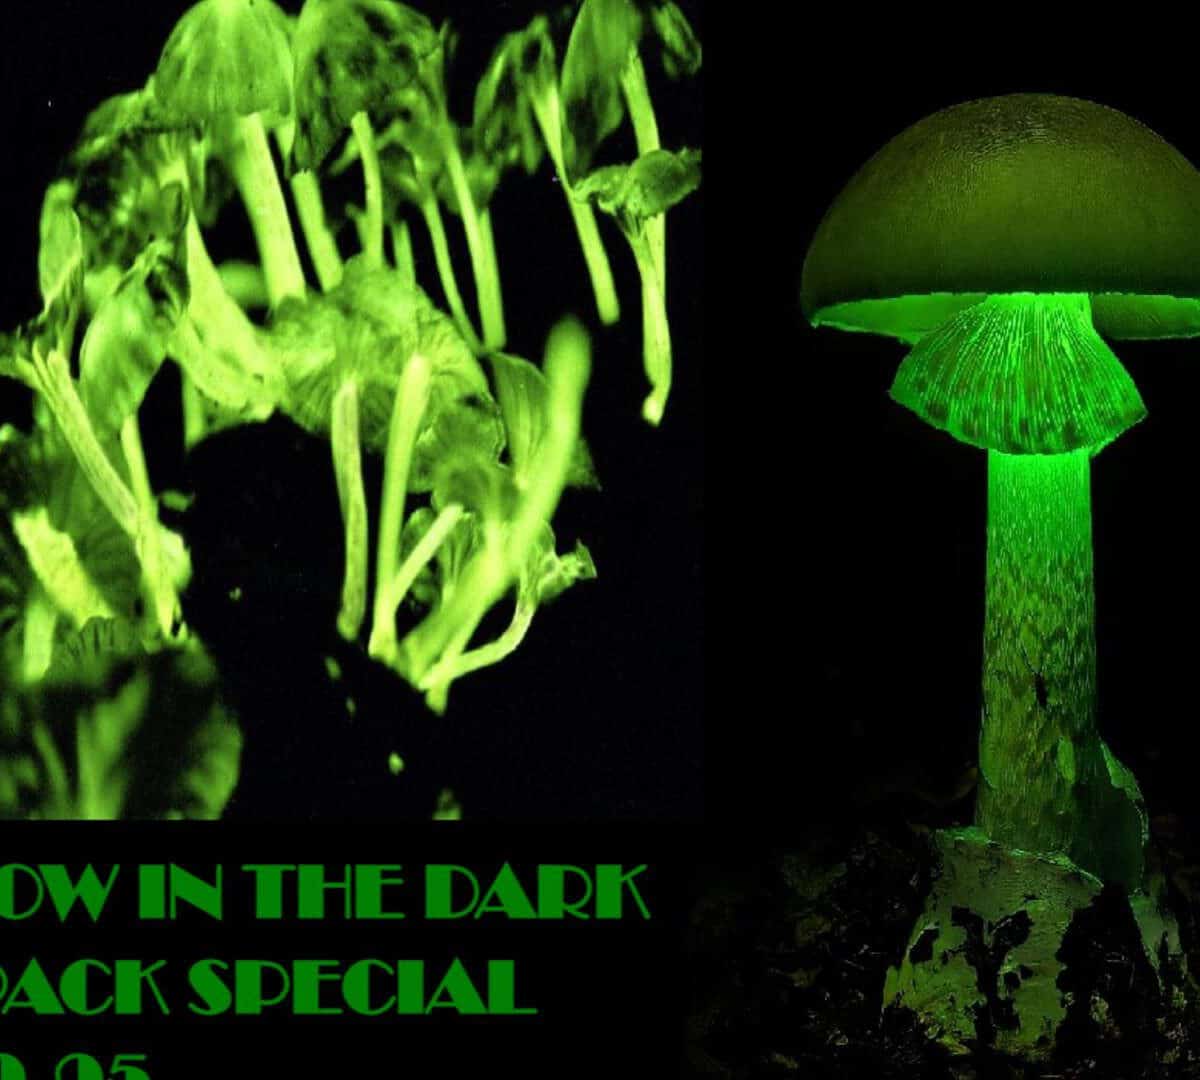 Luminous Lucy AND The Glowing Teacher Magic Mushroom glow in the dark Bioluminescent Fungi from miracle farms spores spore syringe